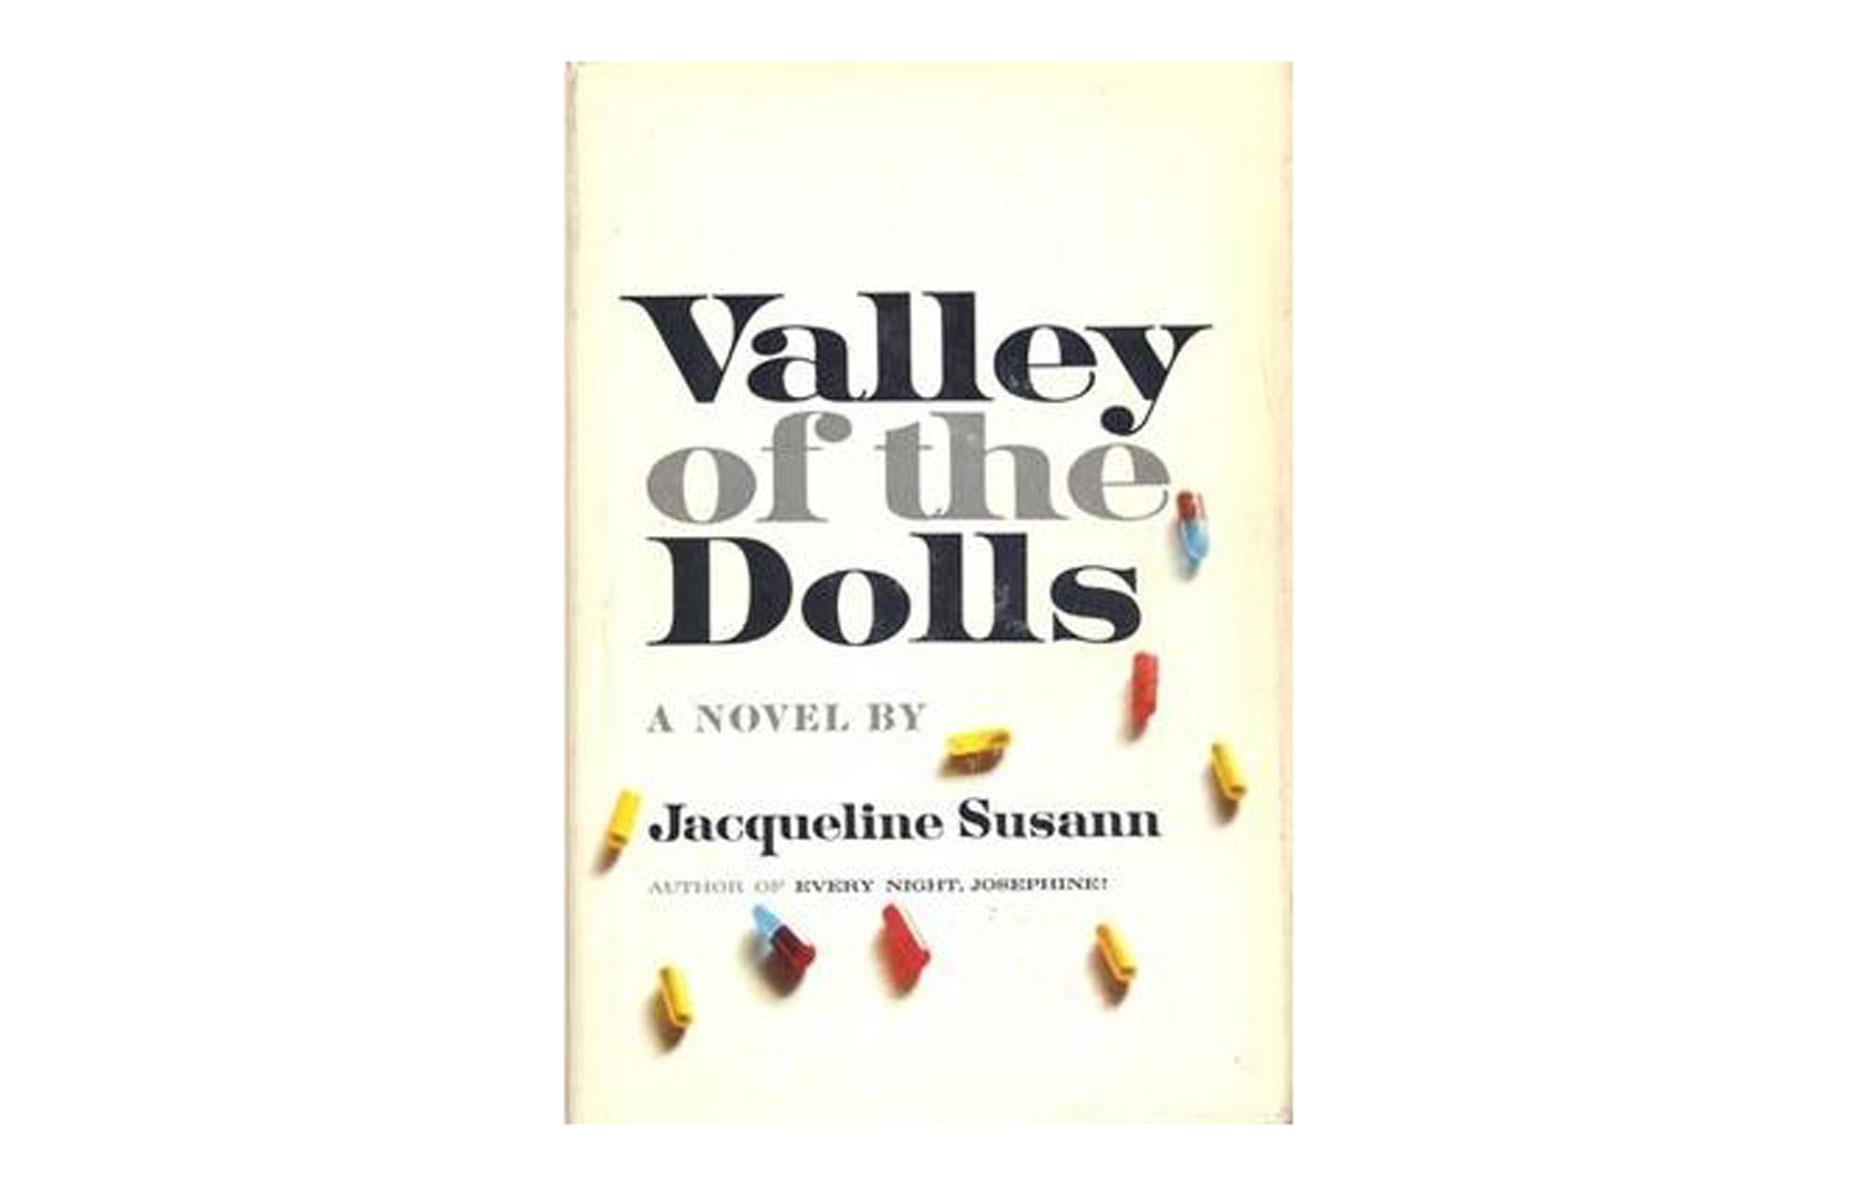 1960s: Valley of the Dolls by Jacqueline Susann 